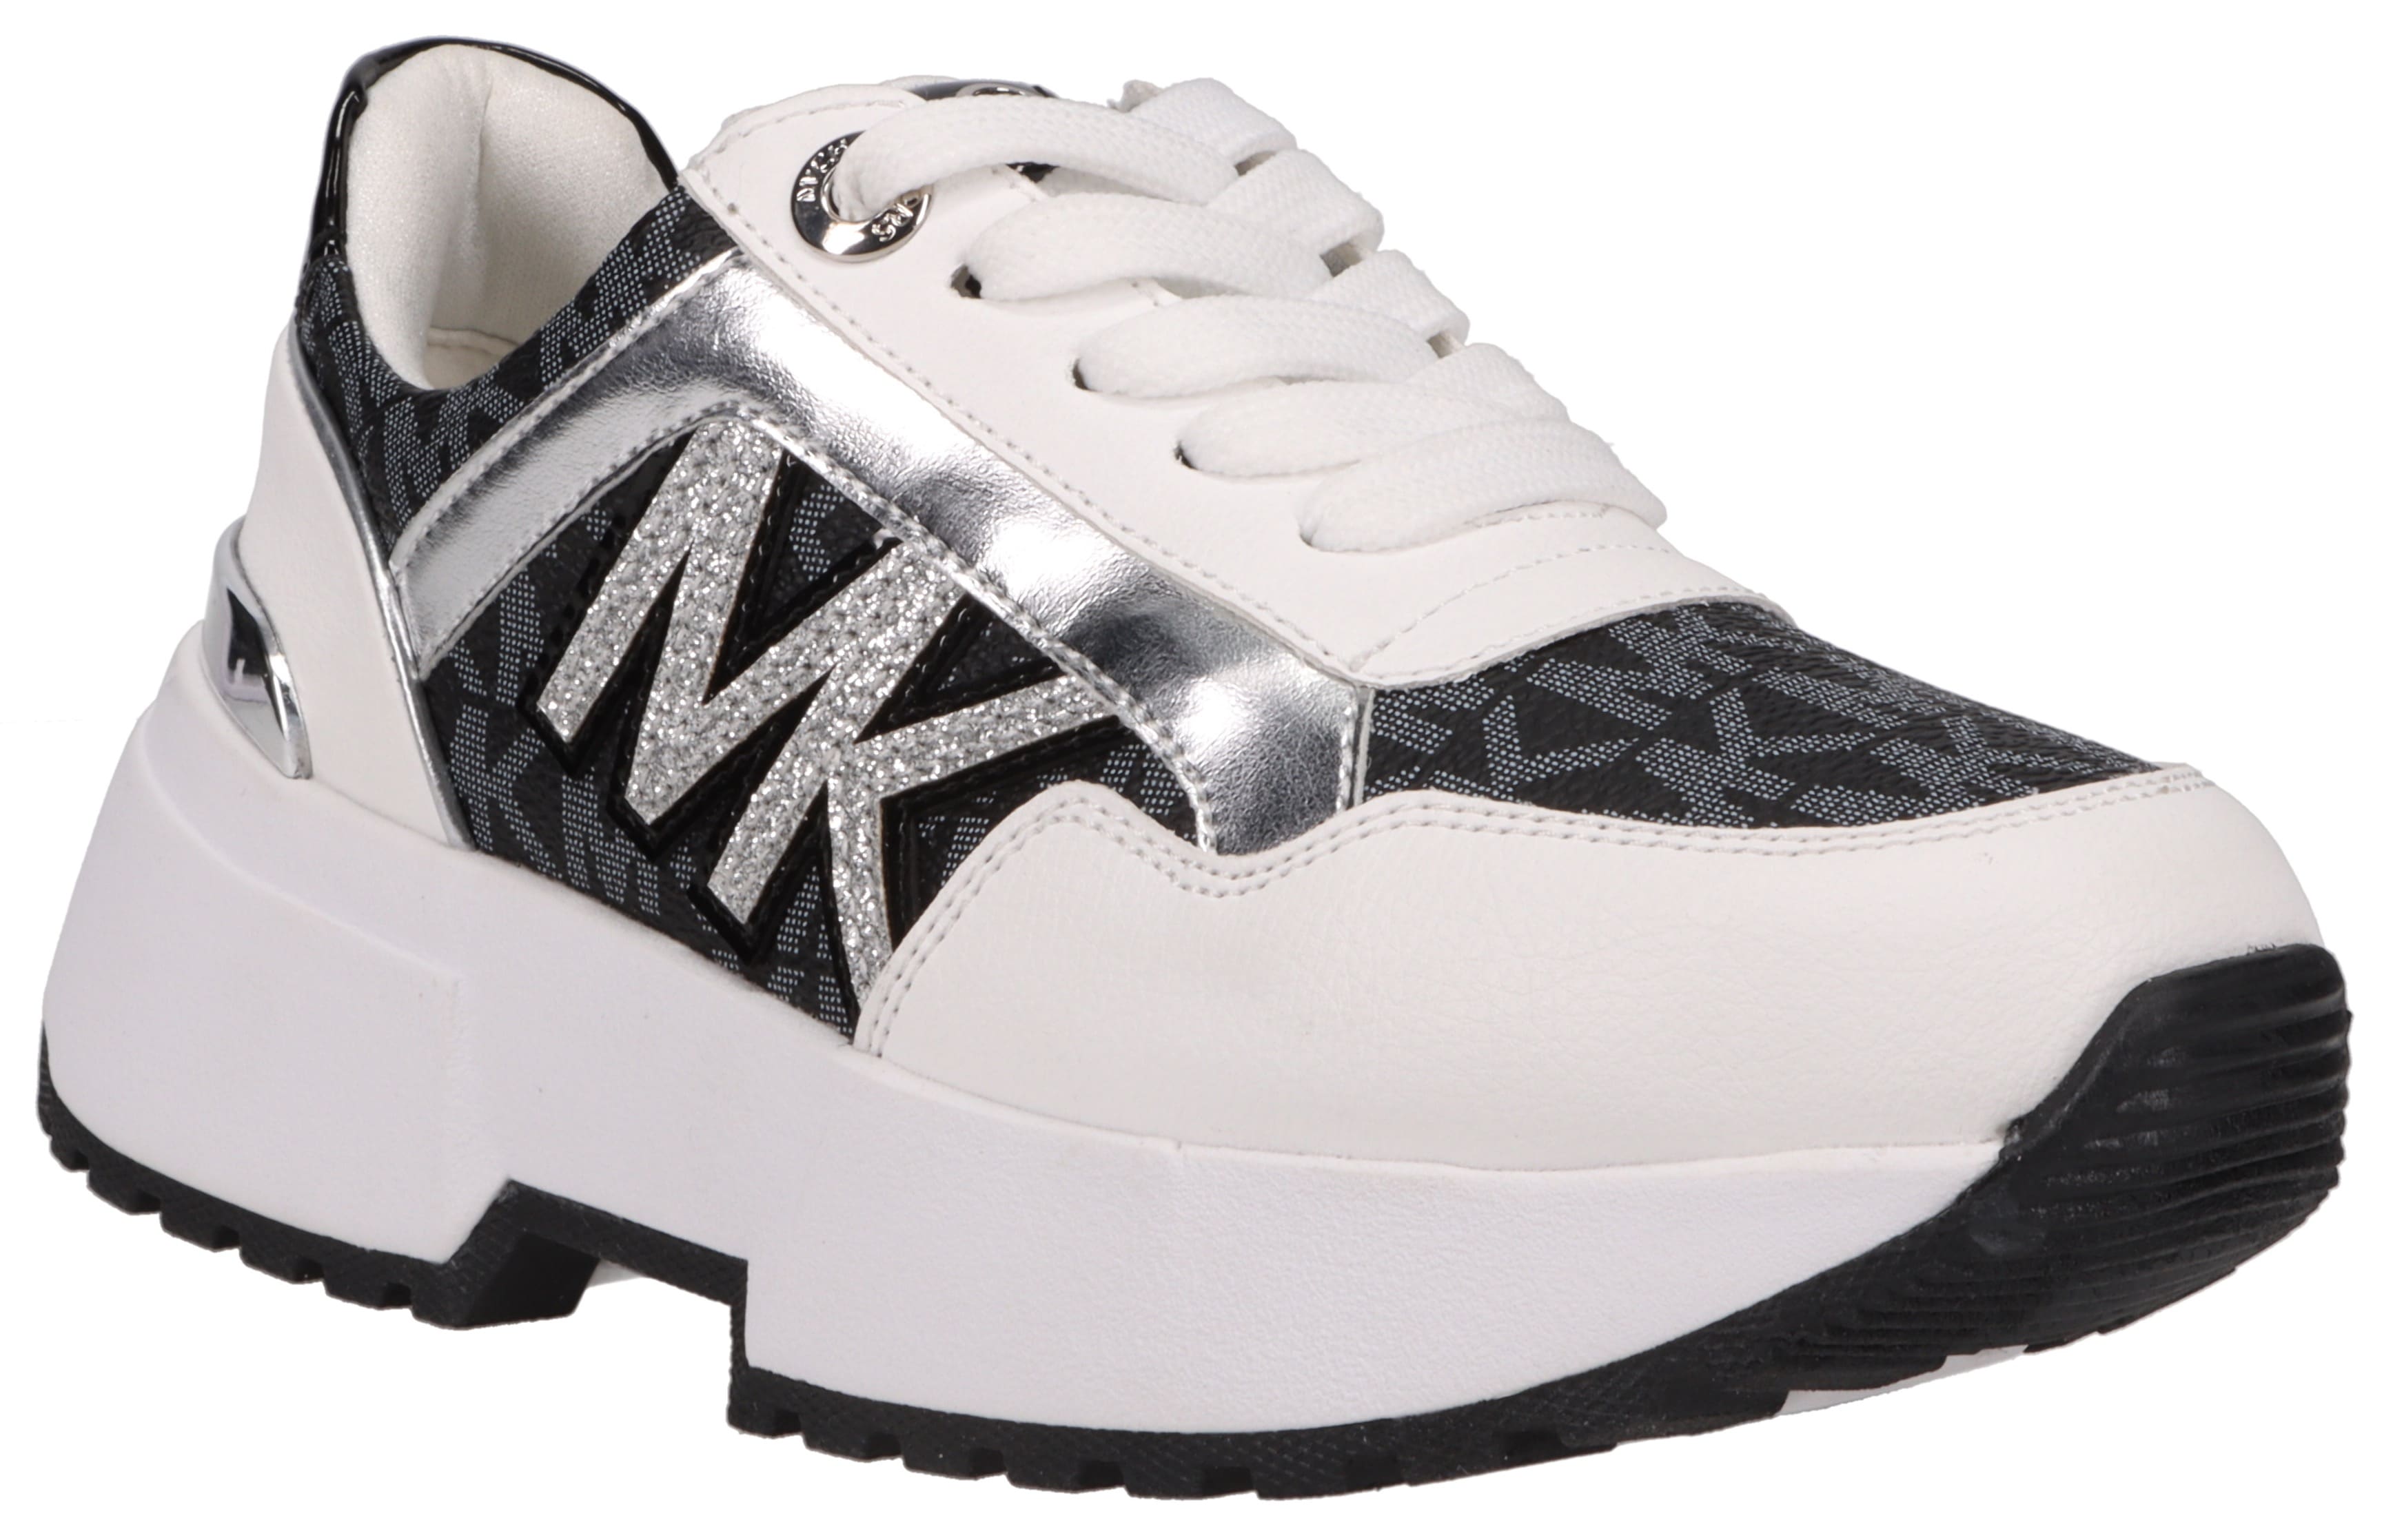 MICHAEL KORS KIDS Plateausneaker »Cosmo Maddy«, mit Chunky-Laufsohle